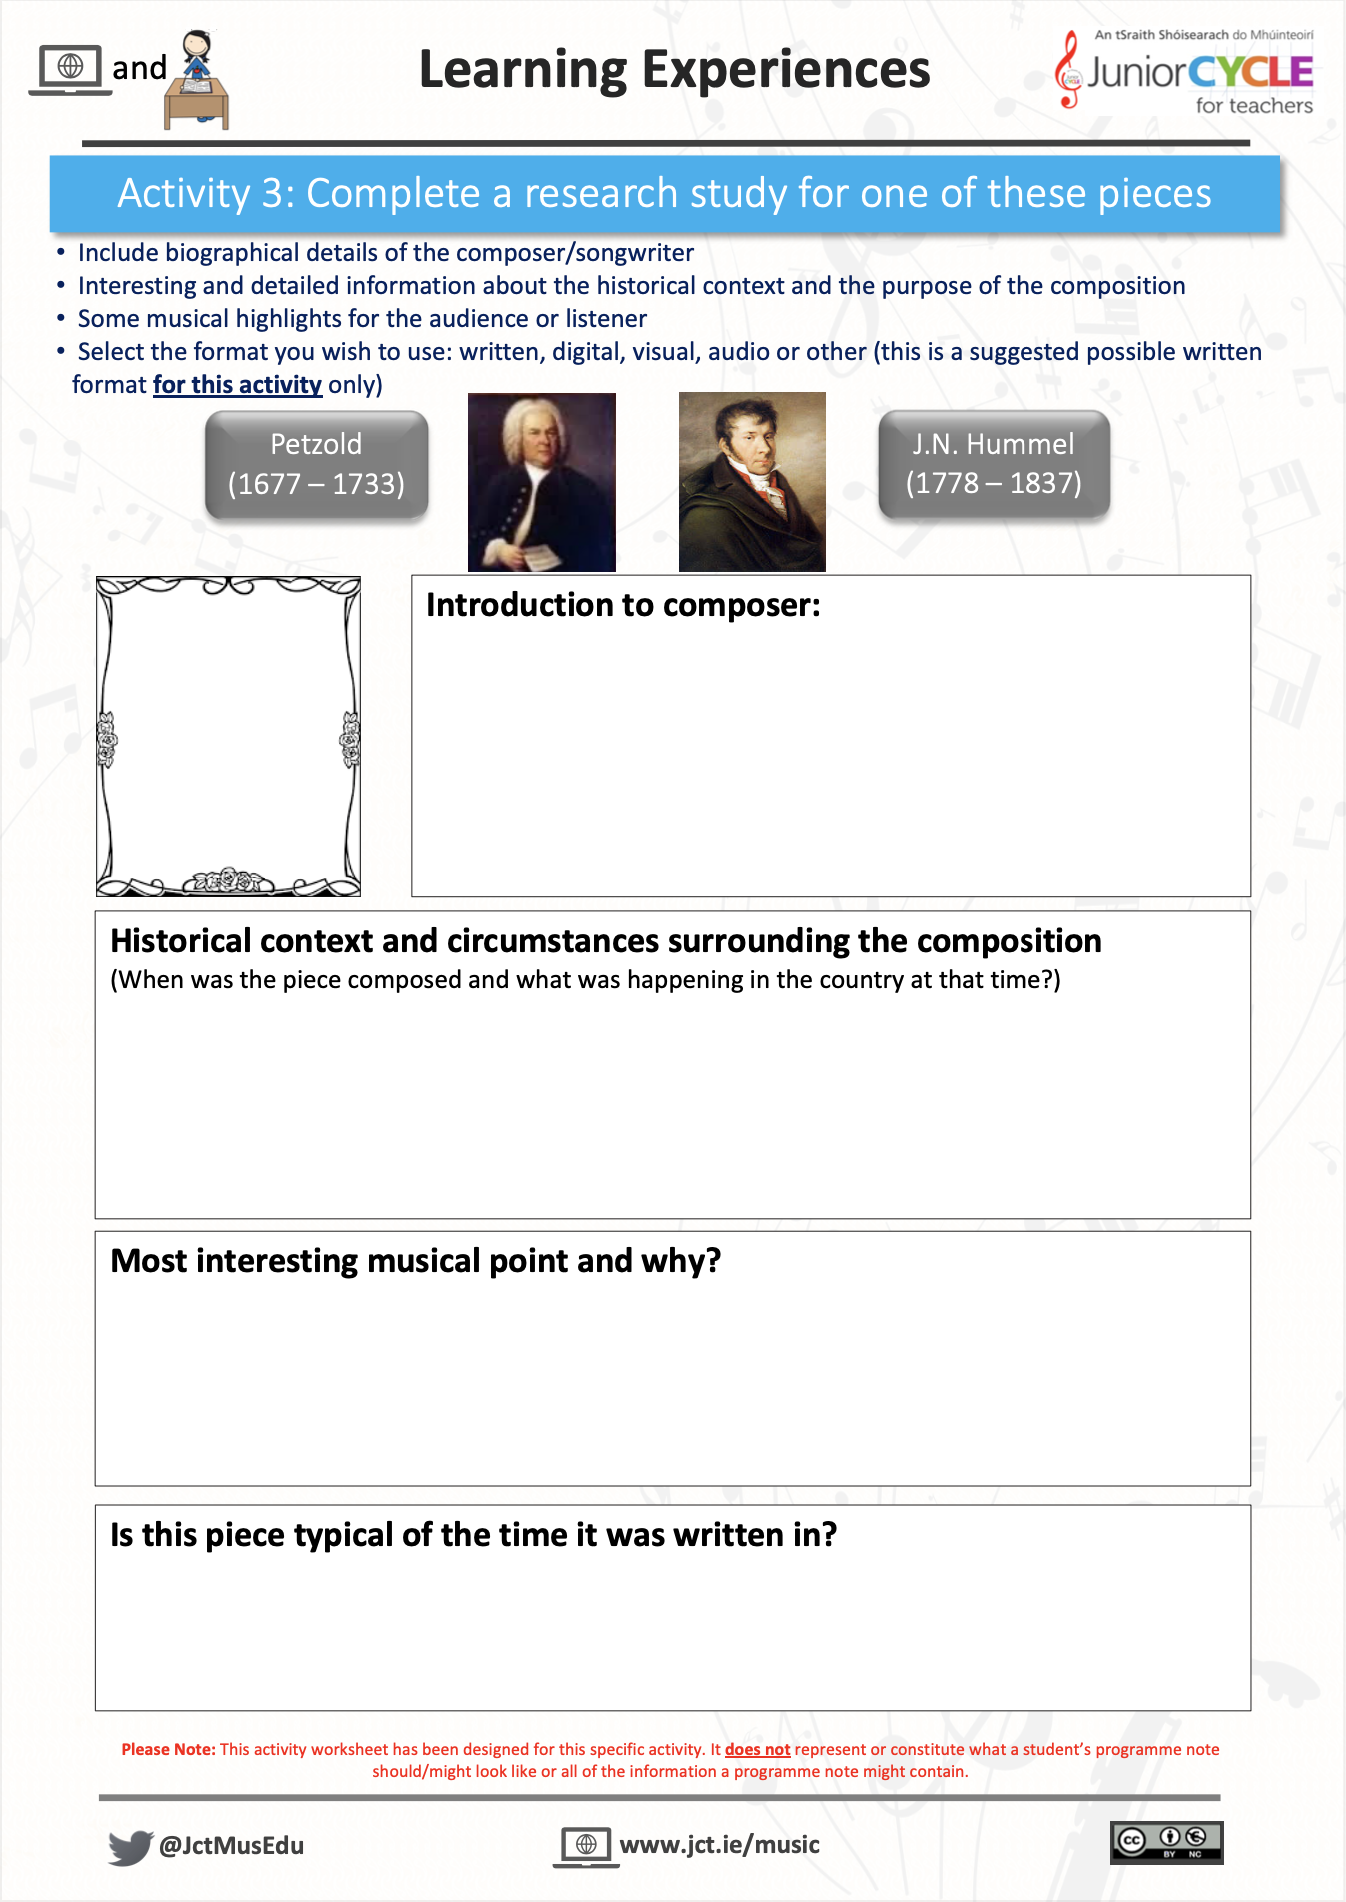 Online Learning Research Skills - Activity 3 Editable